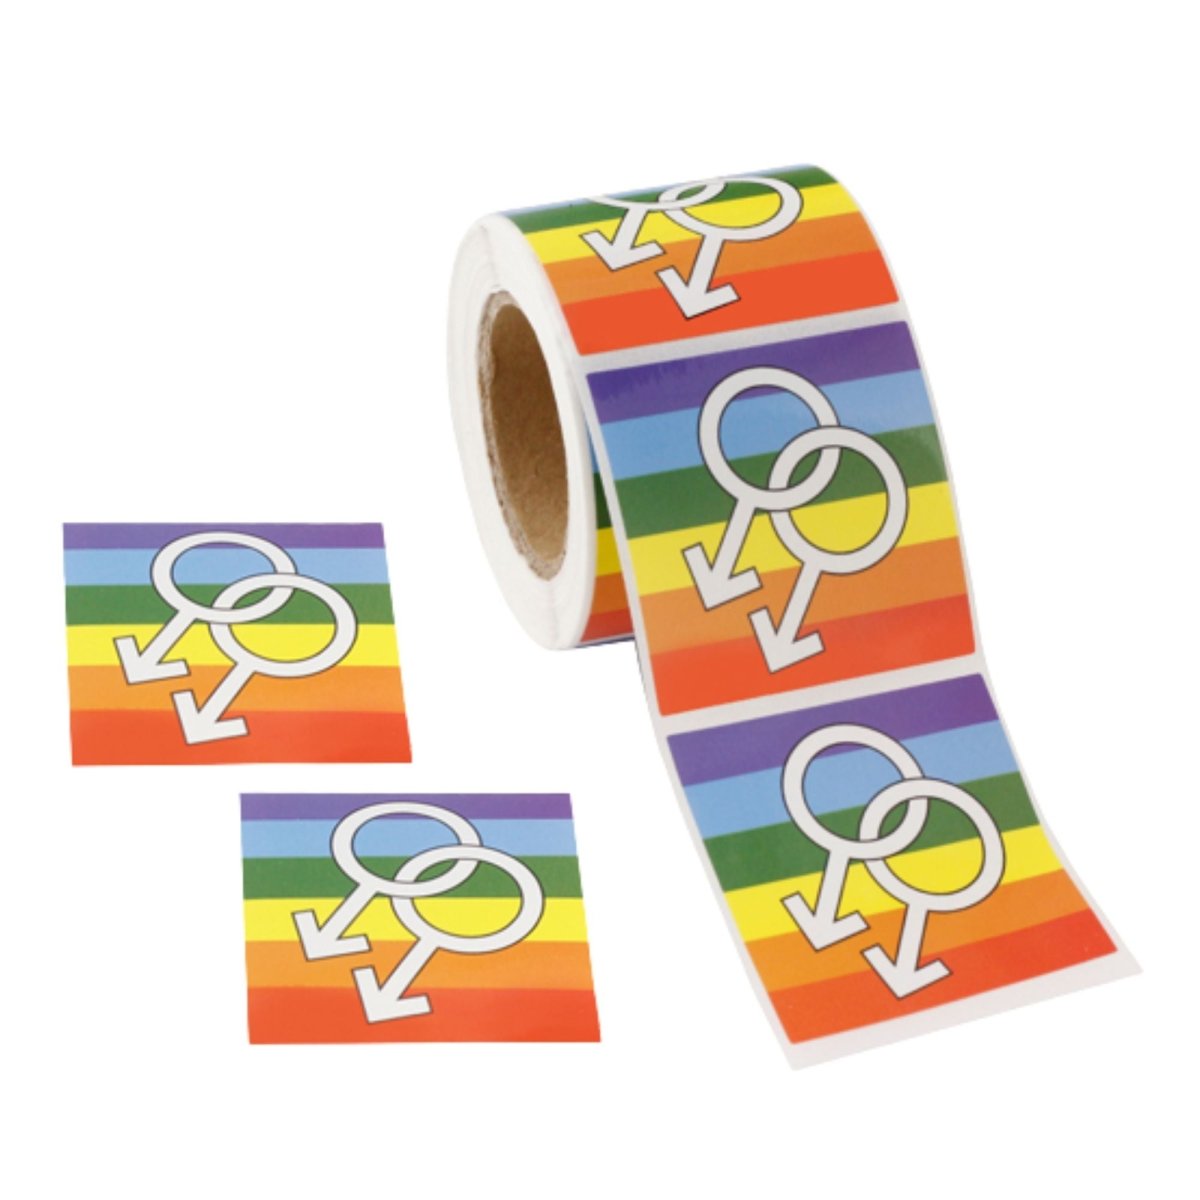 250 Same Sex Male Symbol Stickers (250 per Roll) - Fundraising For A Cause